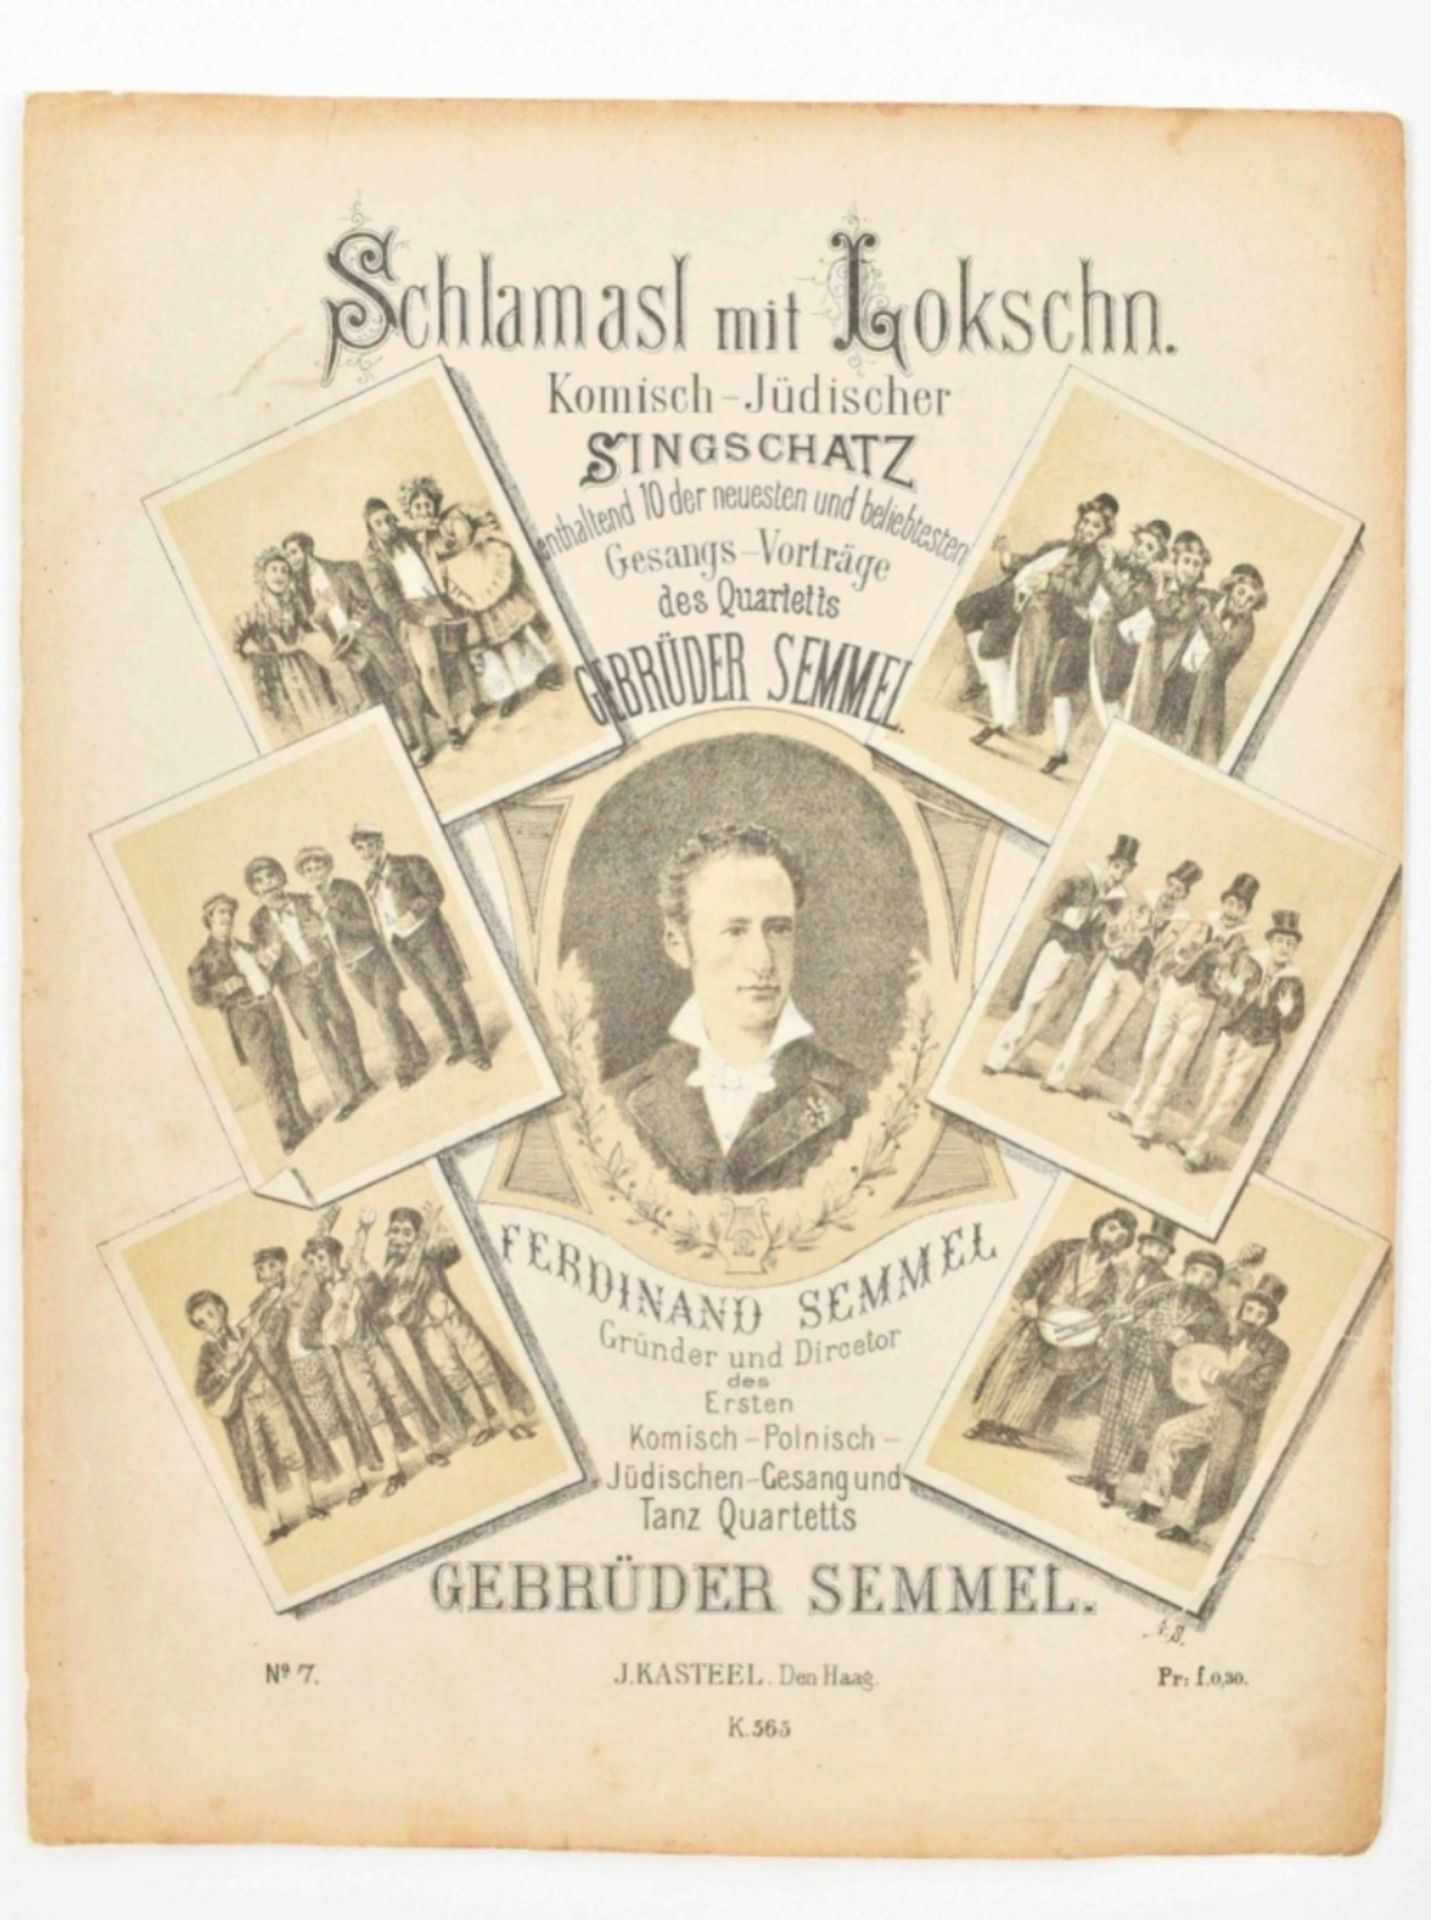 Collection of Jewish sheet music